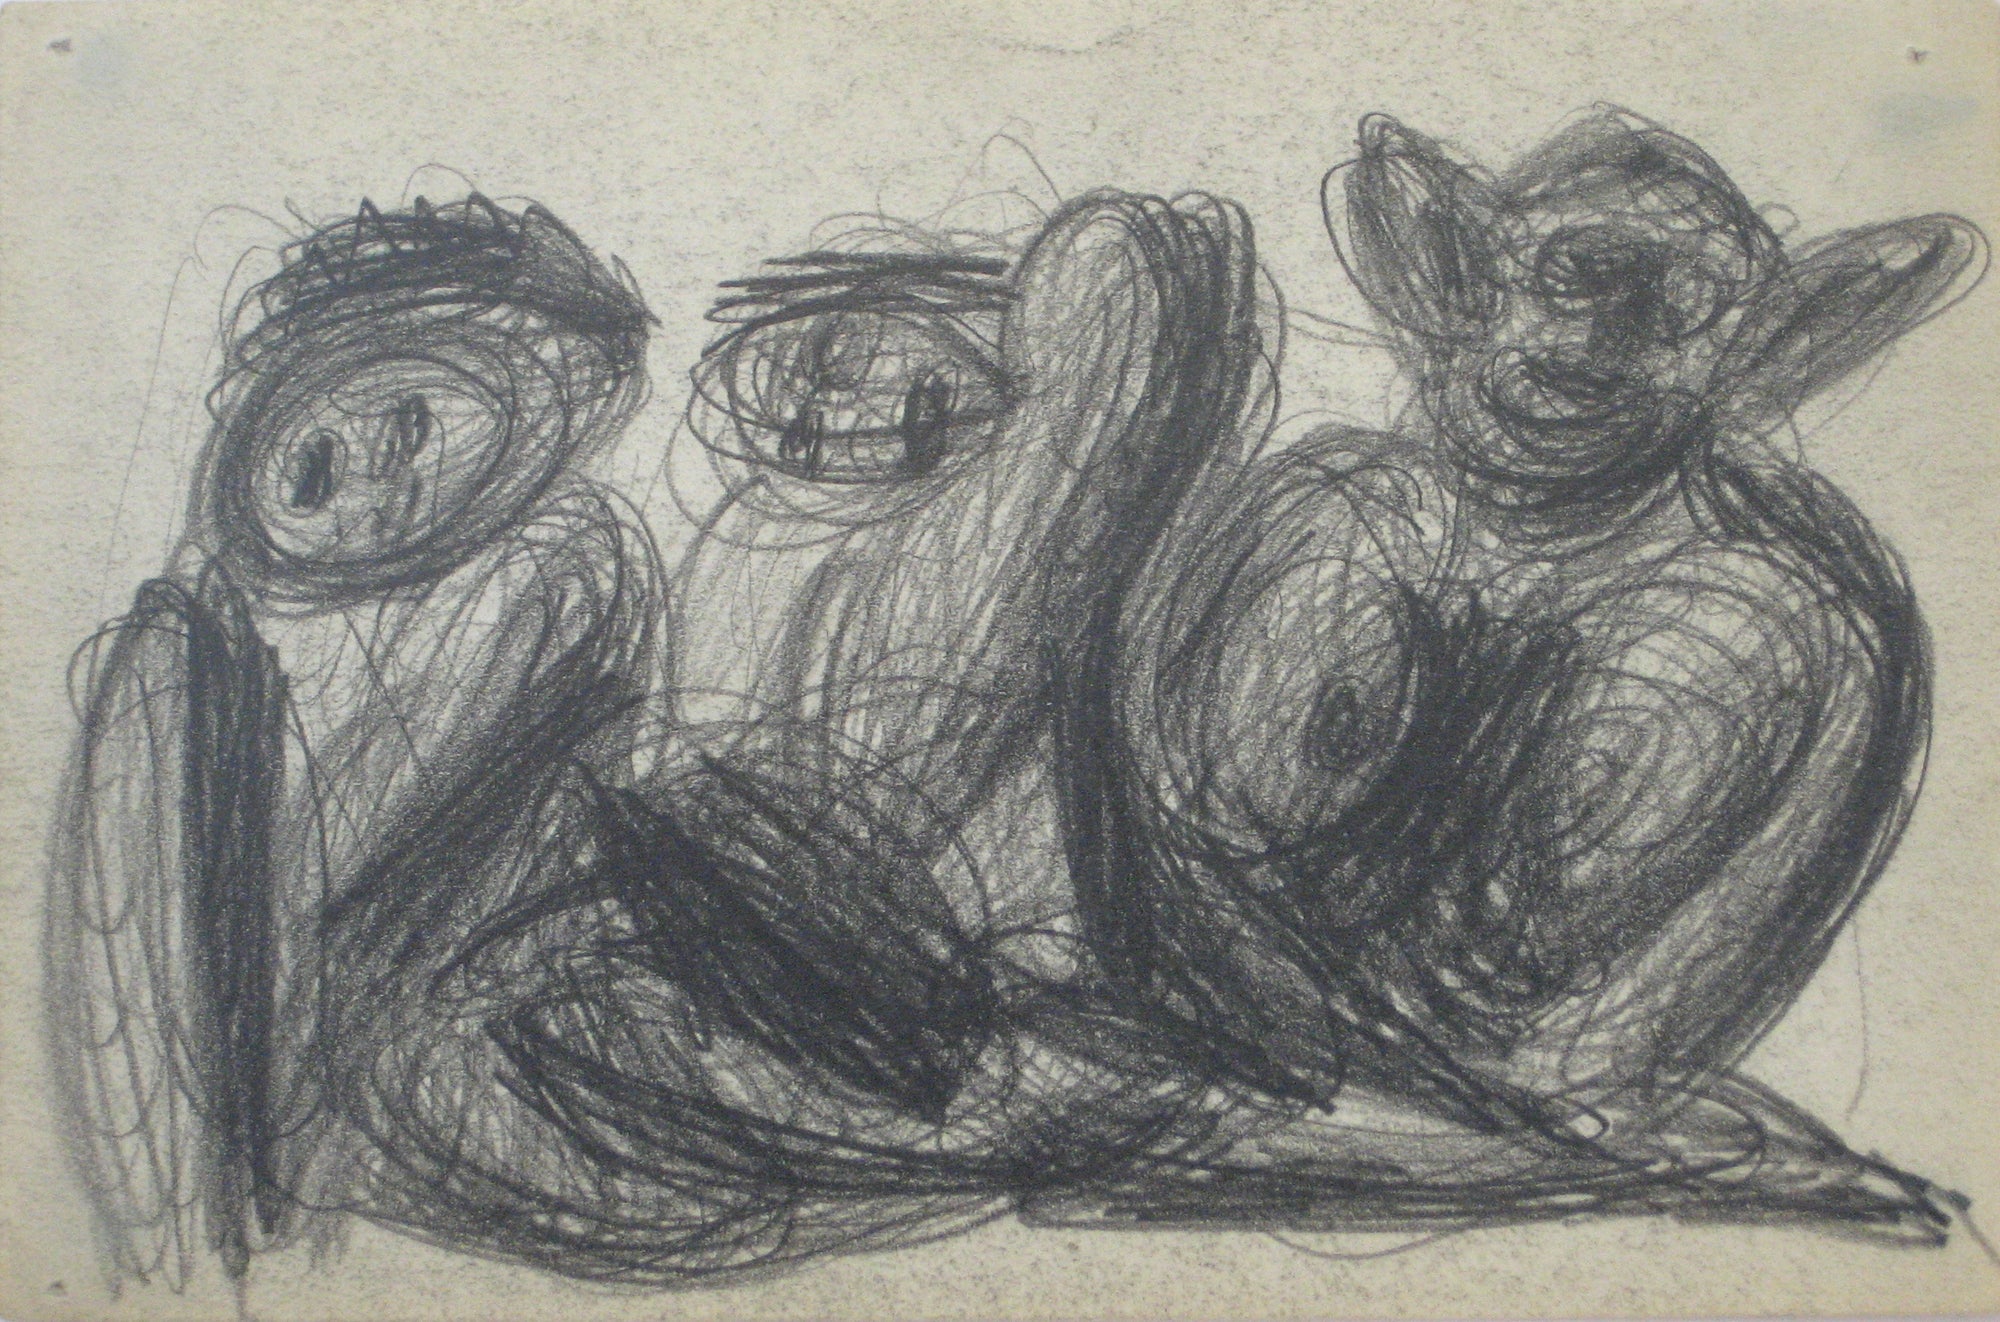 Swirled Abstract Graphite Figures <br>Early-Mid 20th Century <br><br>#14080